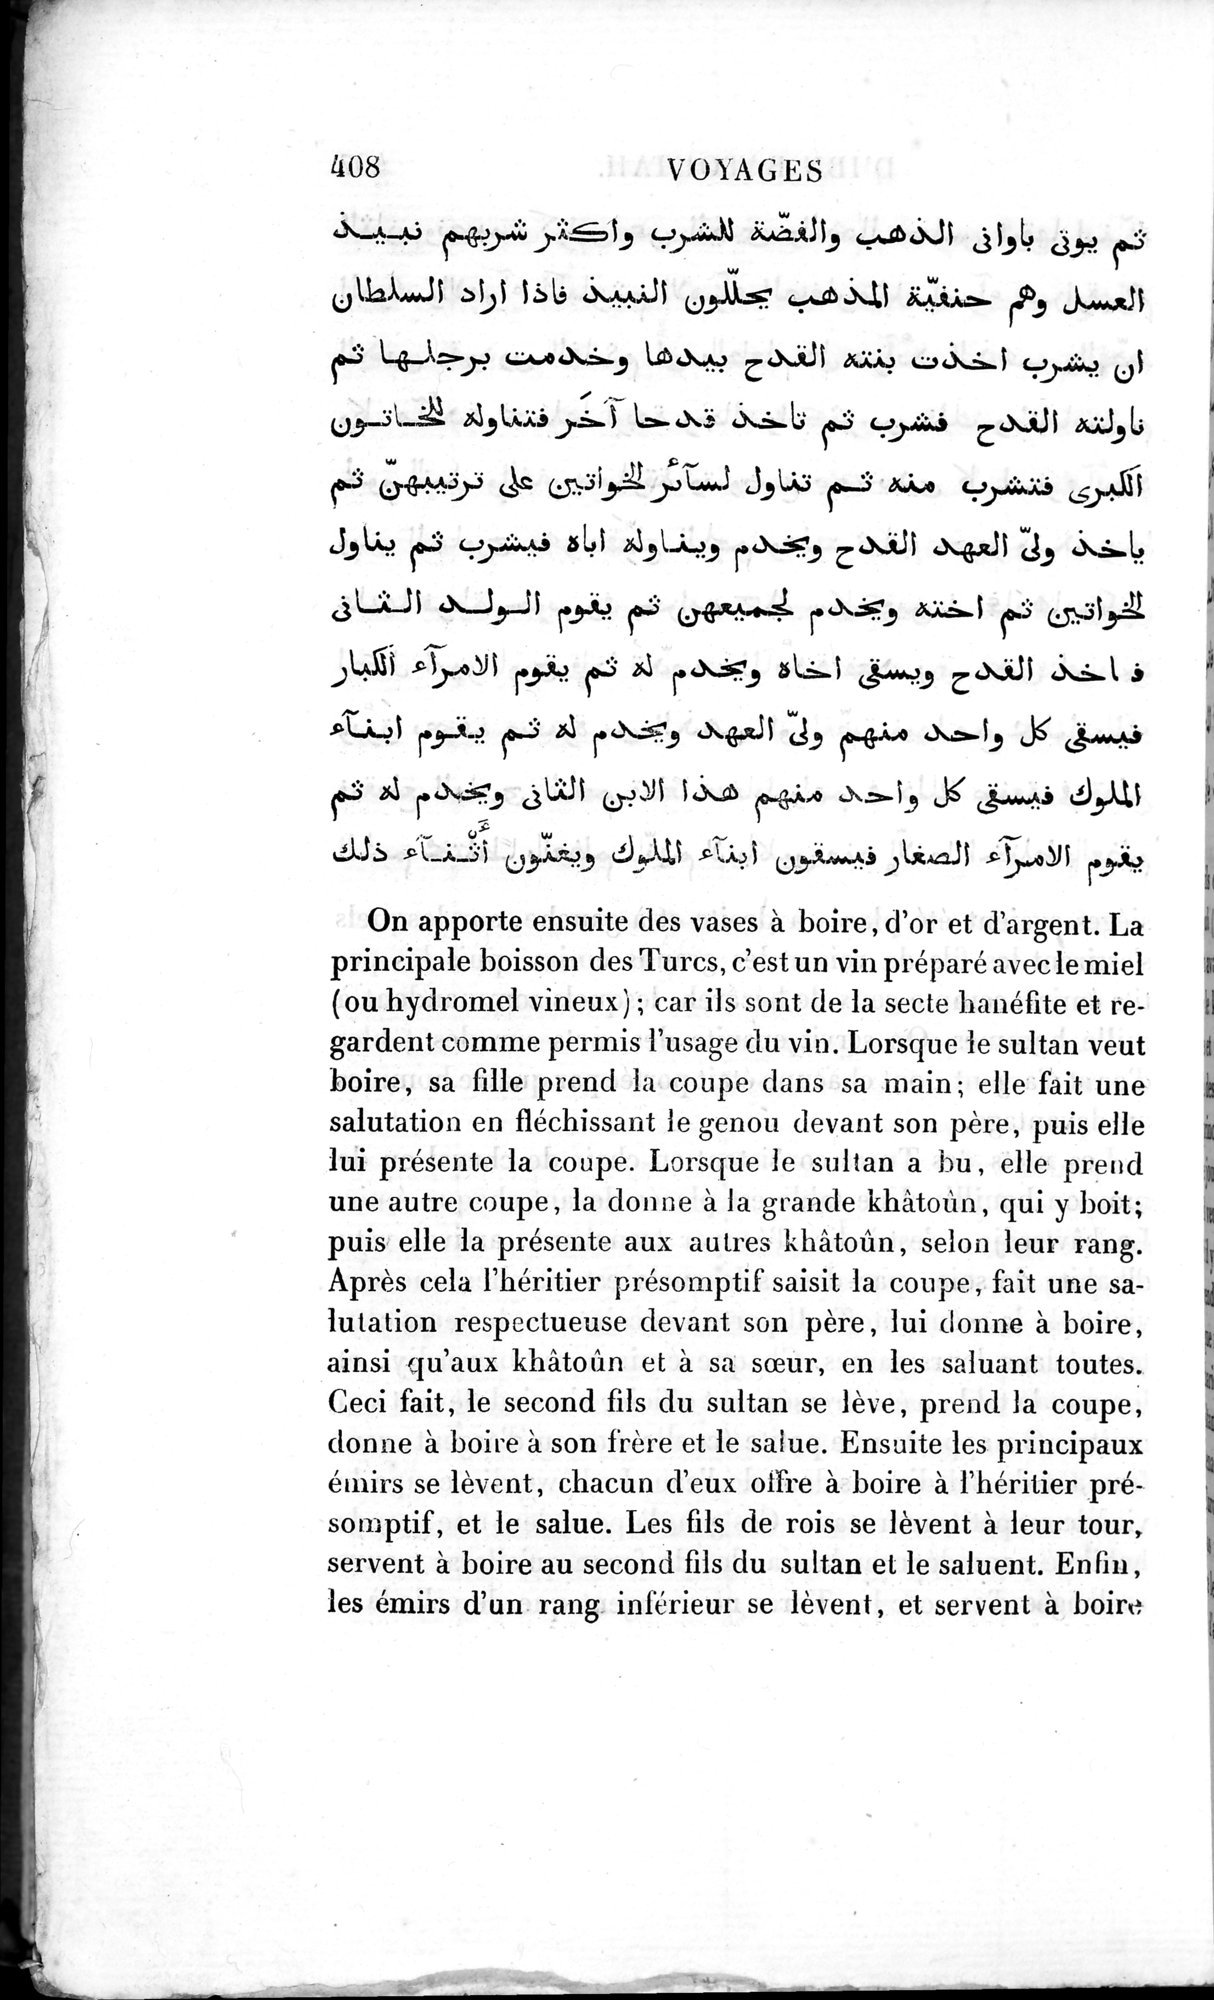 Voyages d'Ibn Batoutah : vol.2 / Page 436 (Grayscale High Resolution Image)